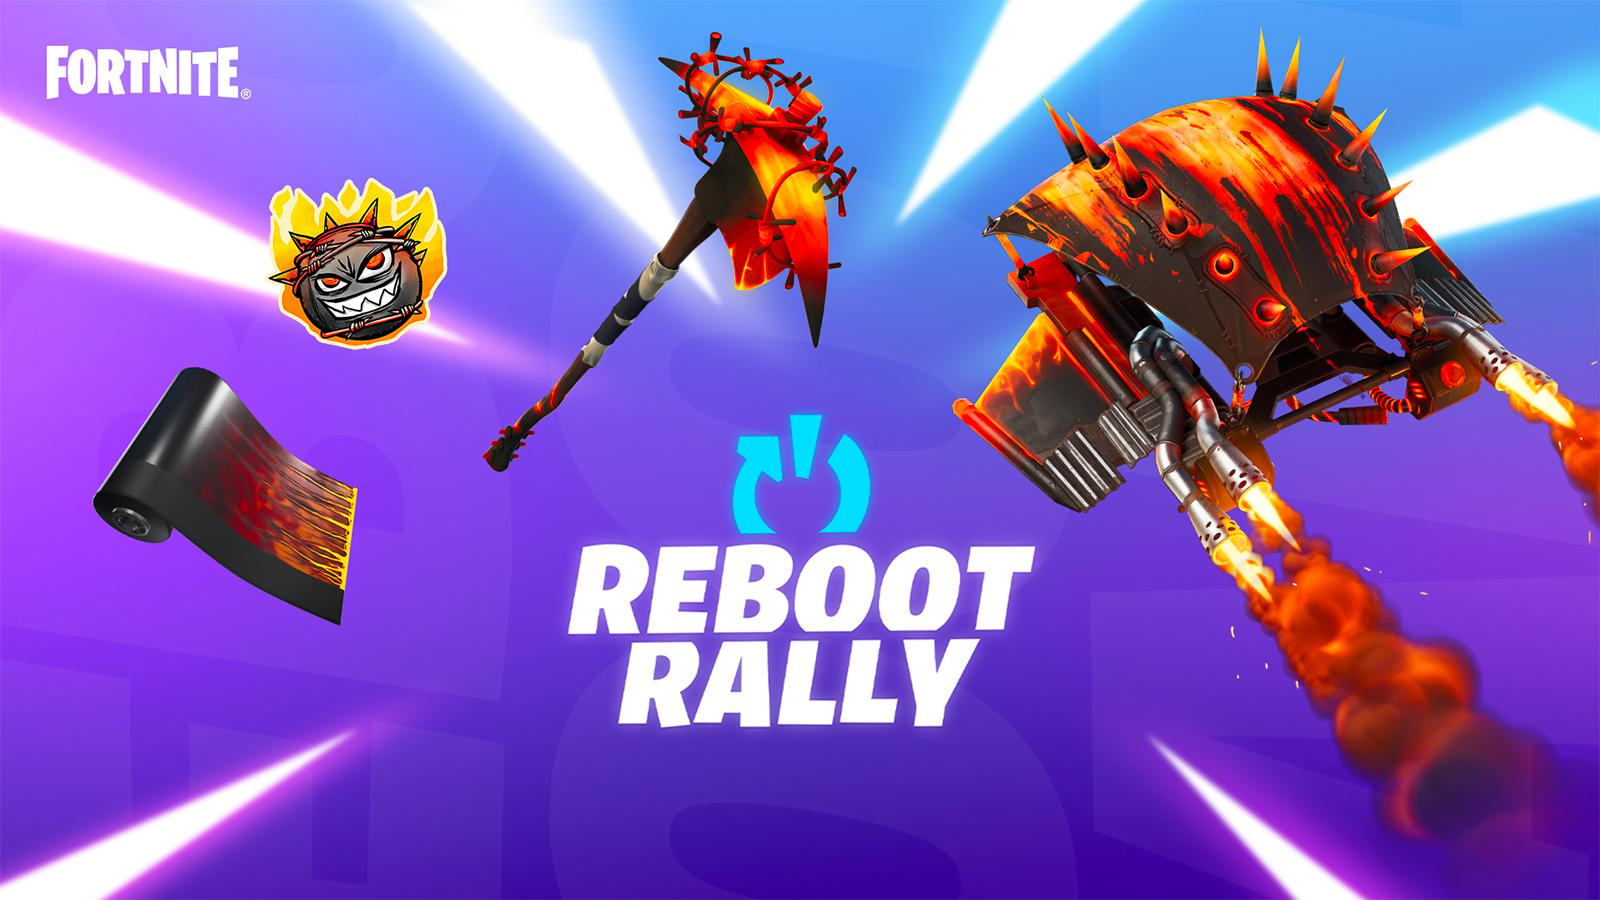 The rewards you can earn for Reboot Rally in Fortnite